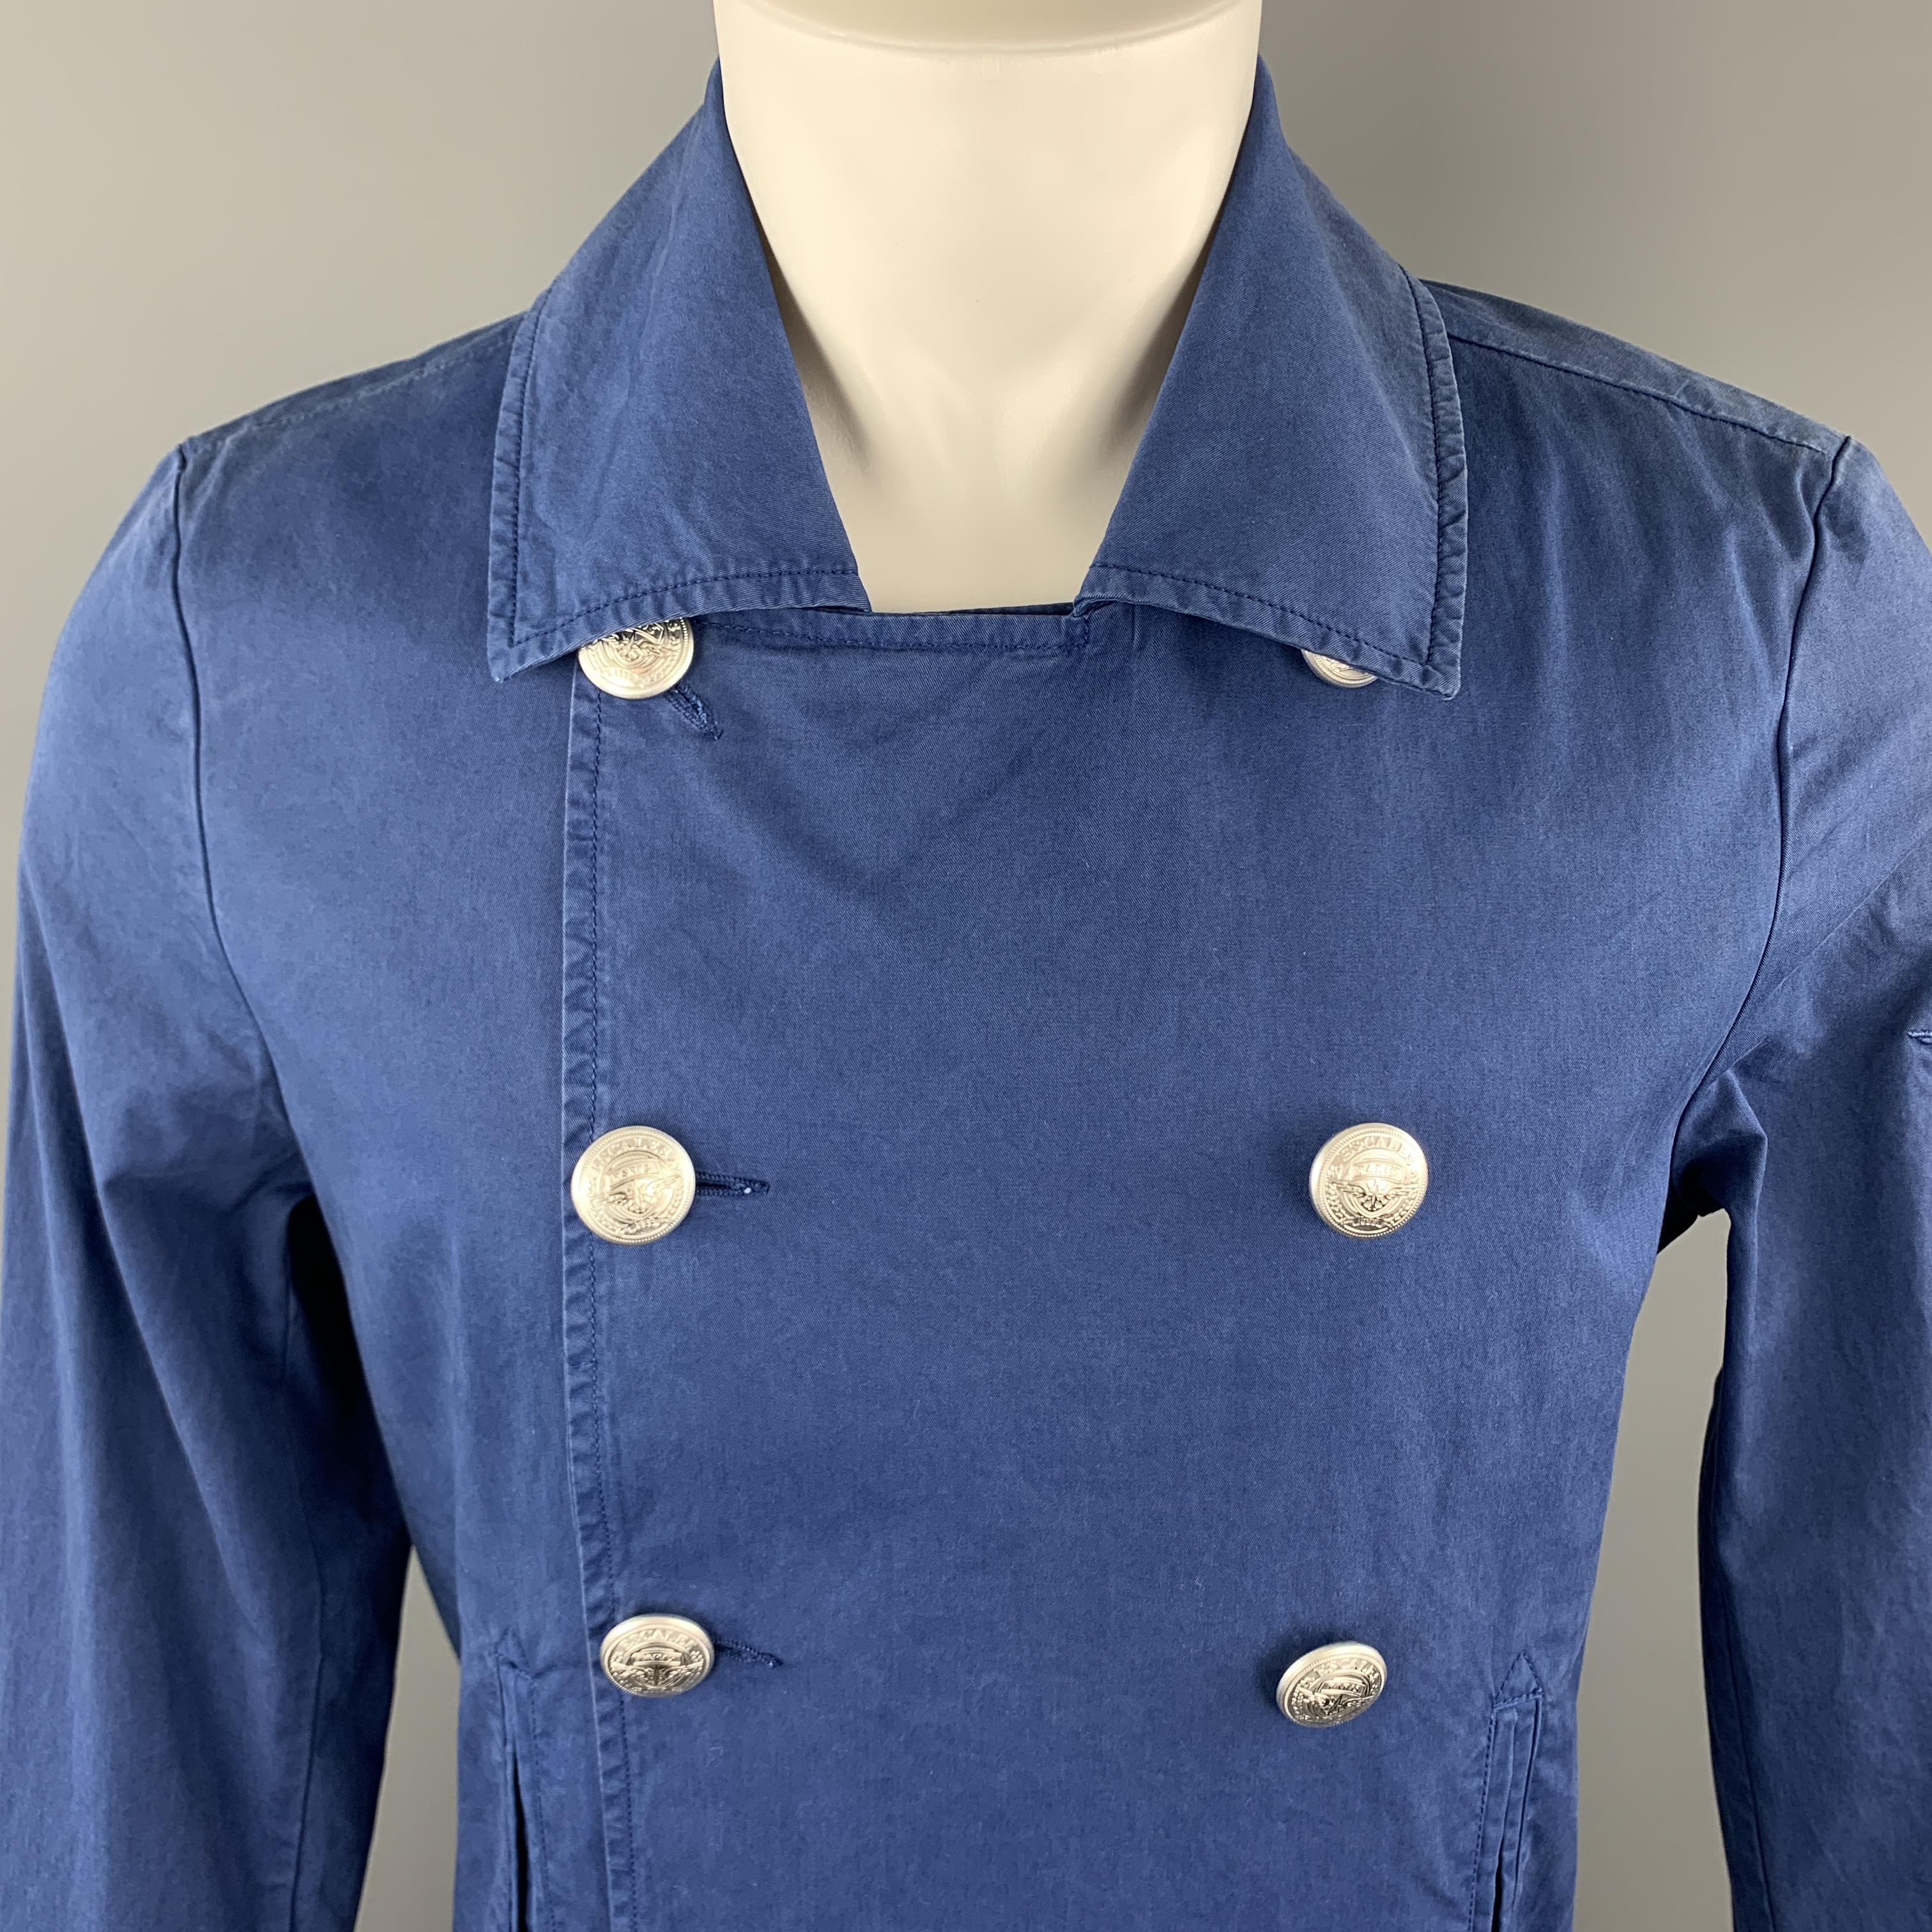 ESCALES Jacket comes in a blue washed cotton material, double breasted, with embossed silver tone metal buttons, slit pockets, trim and functional buttons at cuffs, unlined. 

New With Tags.
Marked: M

Measurements:

Shoulder: 17.5 in.
Chest: 42 in.